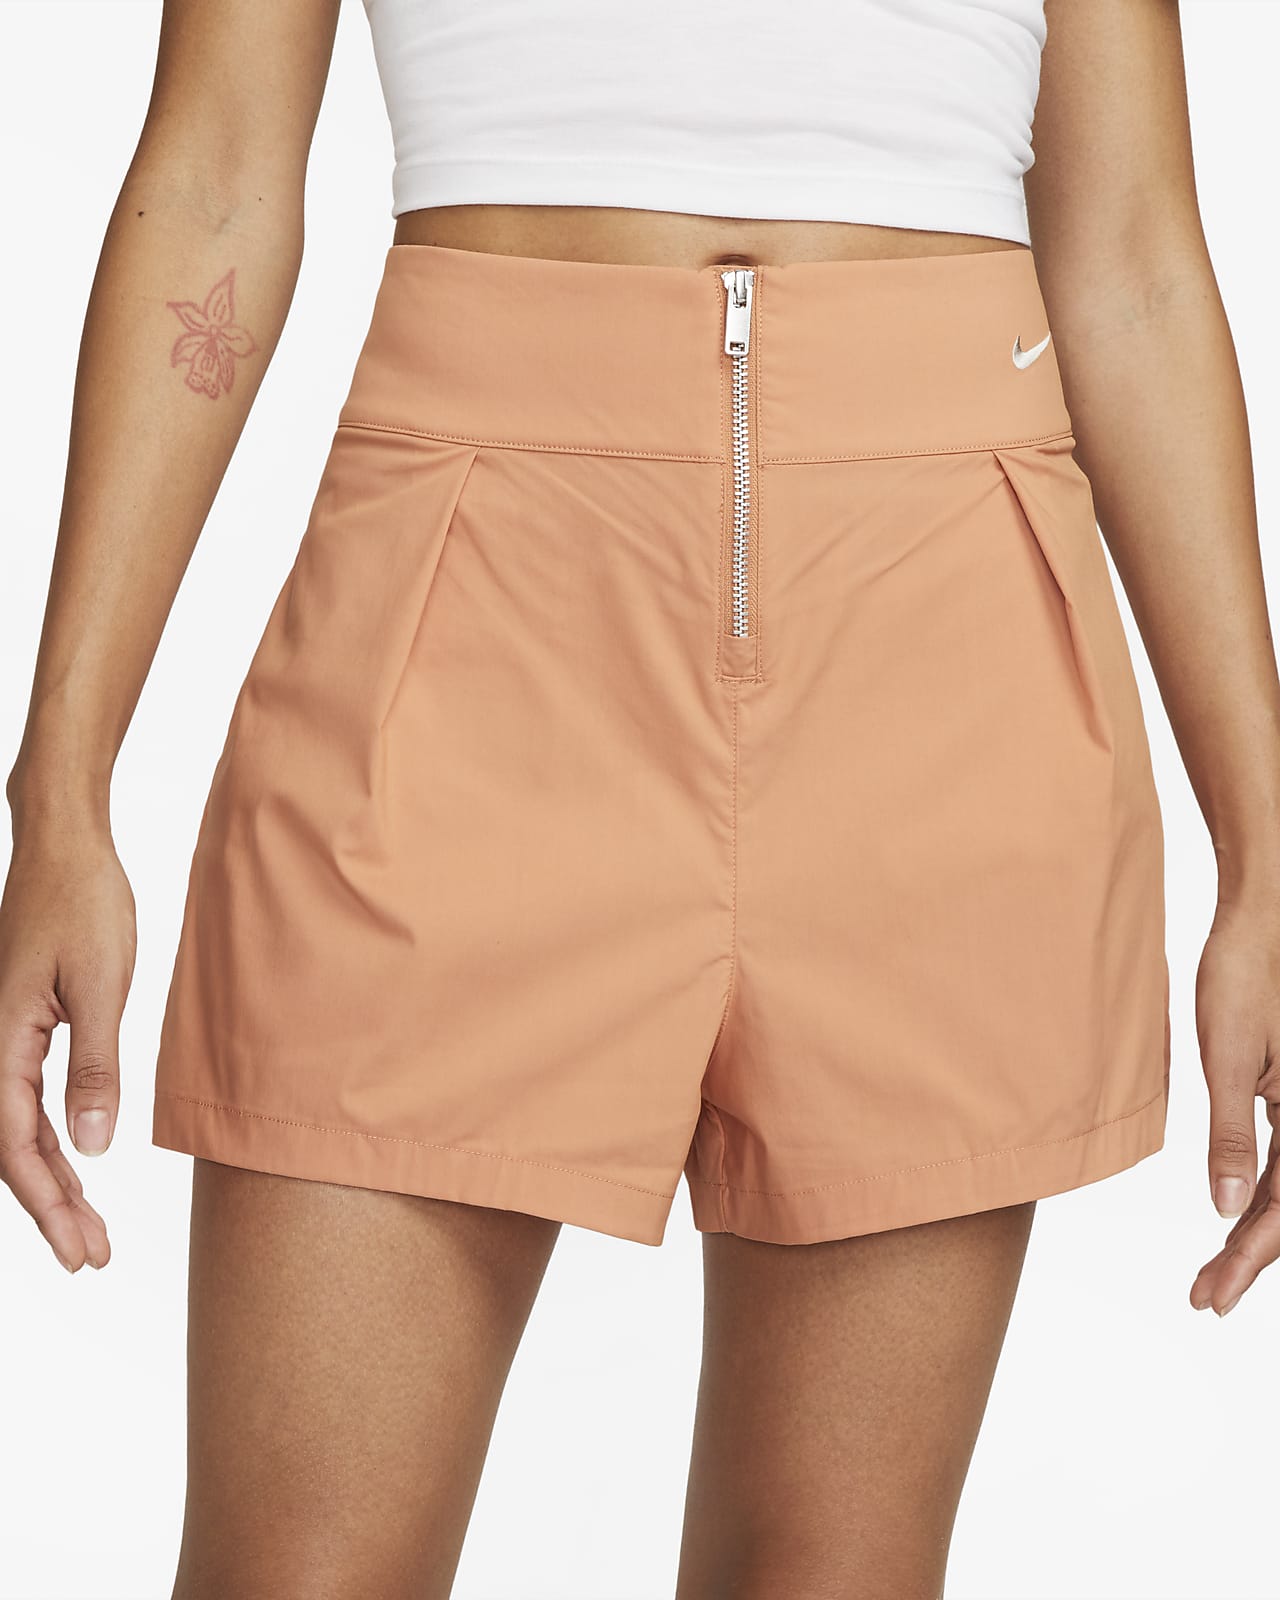 File:Zip off shorts or convertible trousers.jpg - Wikipedia